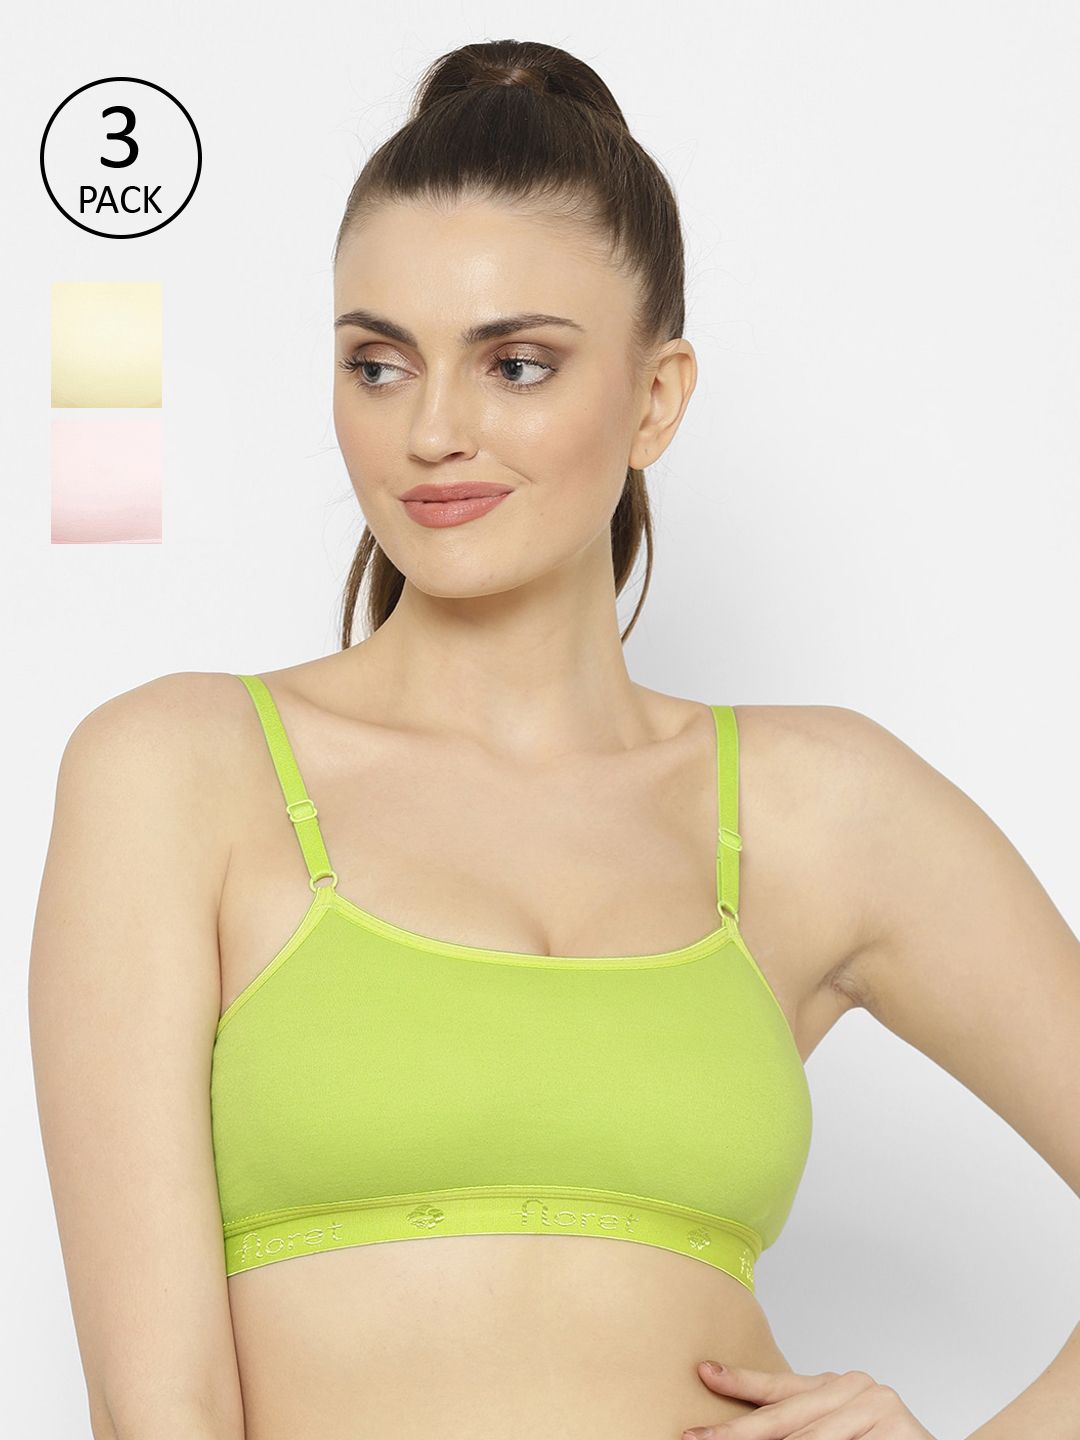 Floret Pink & Yellow Solid Set of 3 Workout Bra 1492_Pink-Lemon-Lime Green-Pink Price in India